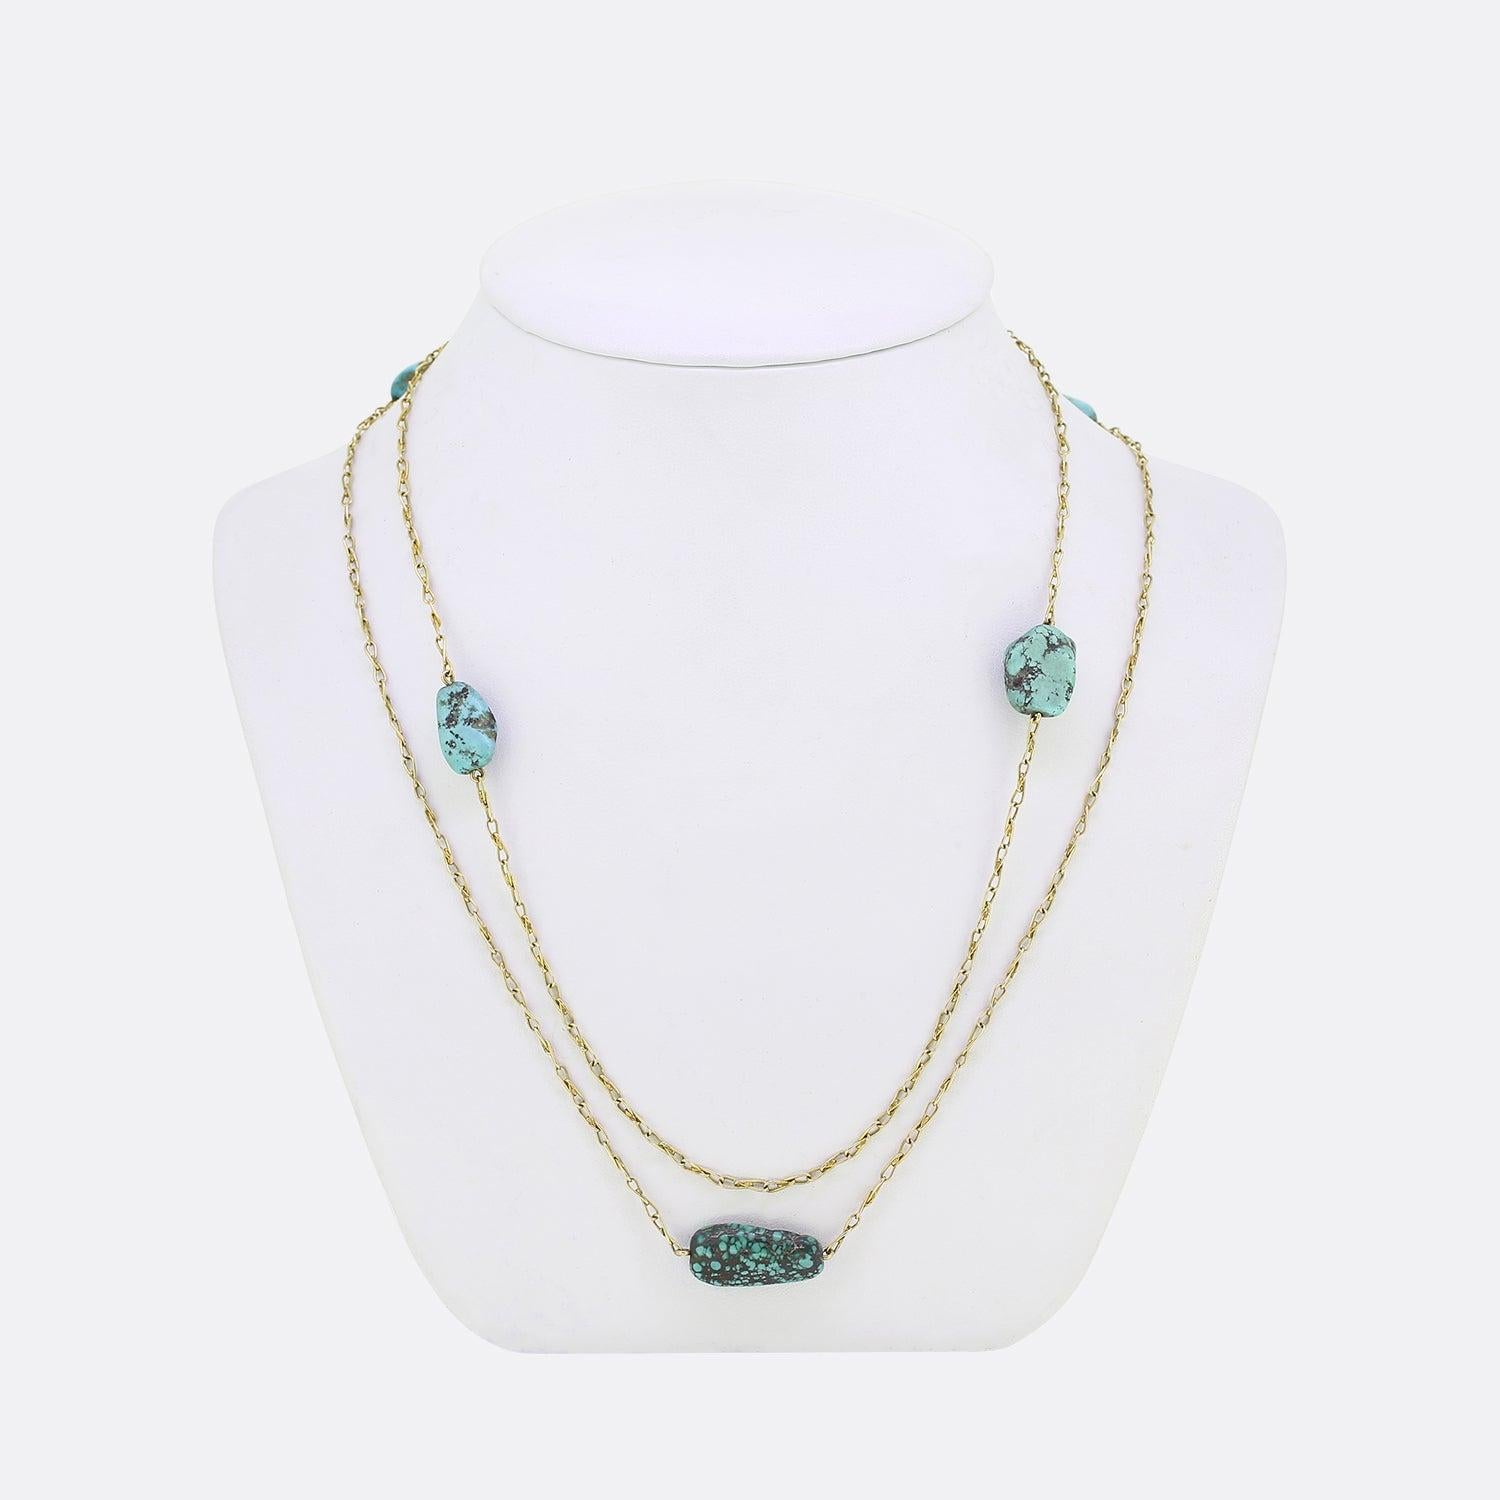 Here we have a unique vintage long chain necklace. The chain is of a curved loop belcher style and features an ensemble of significant turquoise nuggets of differing sizes; each of which has been pierced at the centre and set harmoniously in a